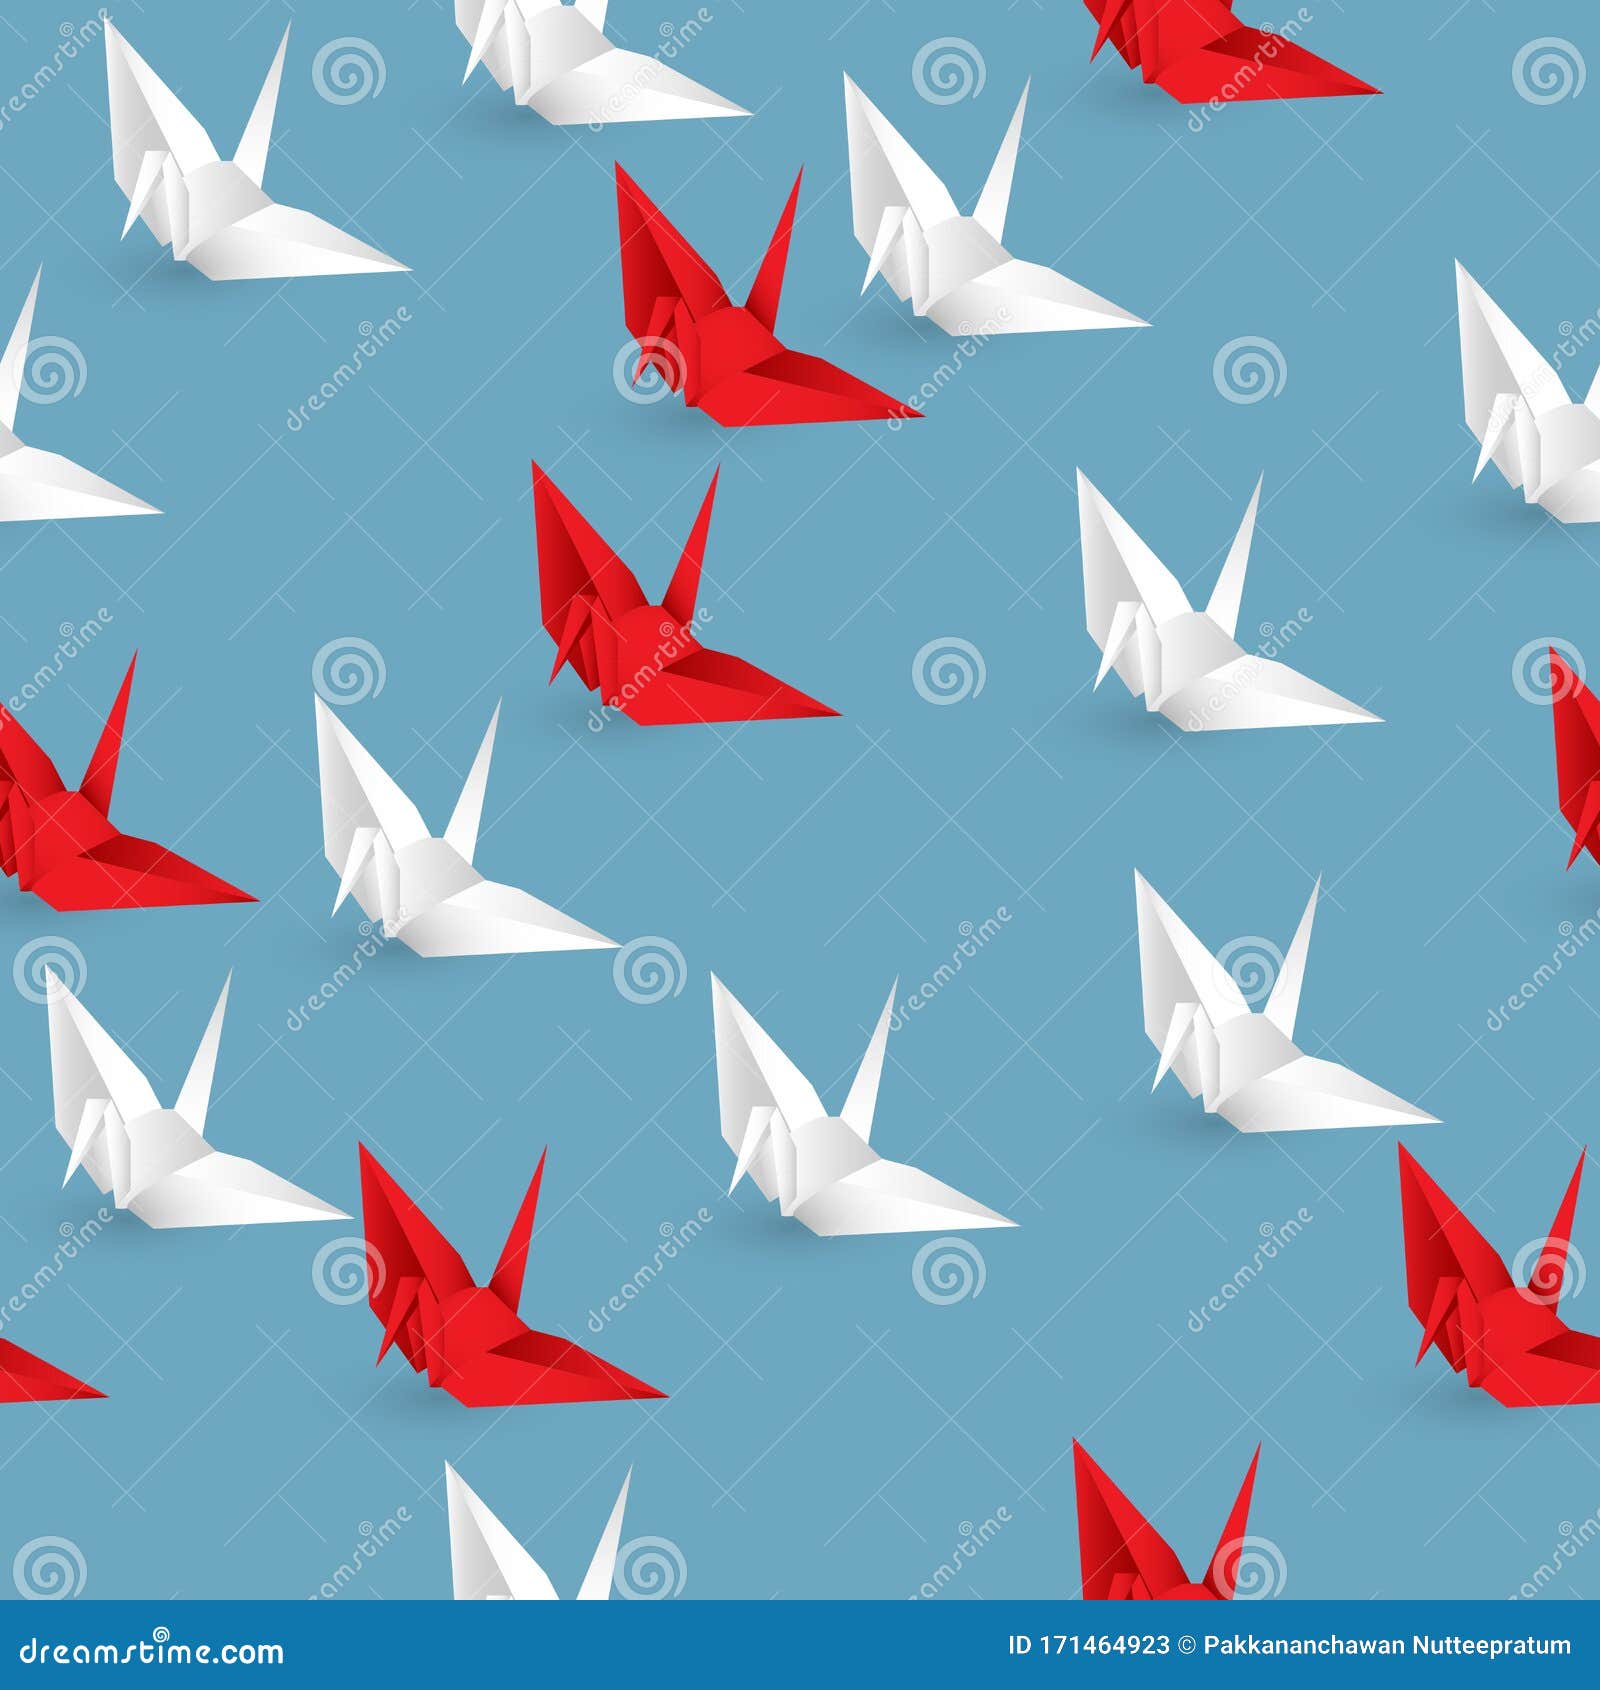 A Red Origami Paper Bird On Paper Background Stock Photo